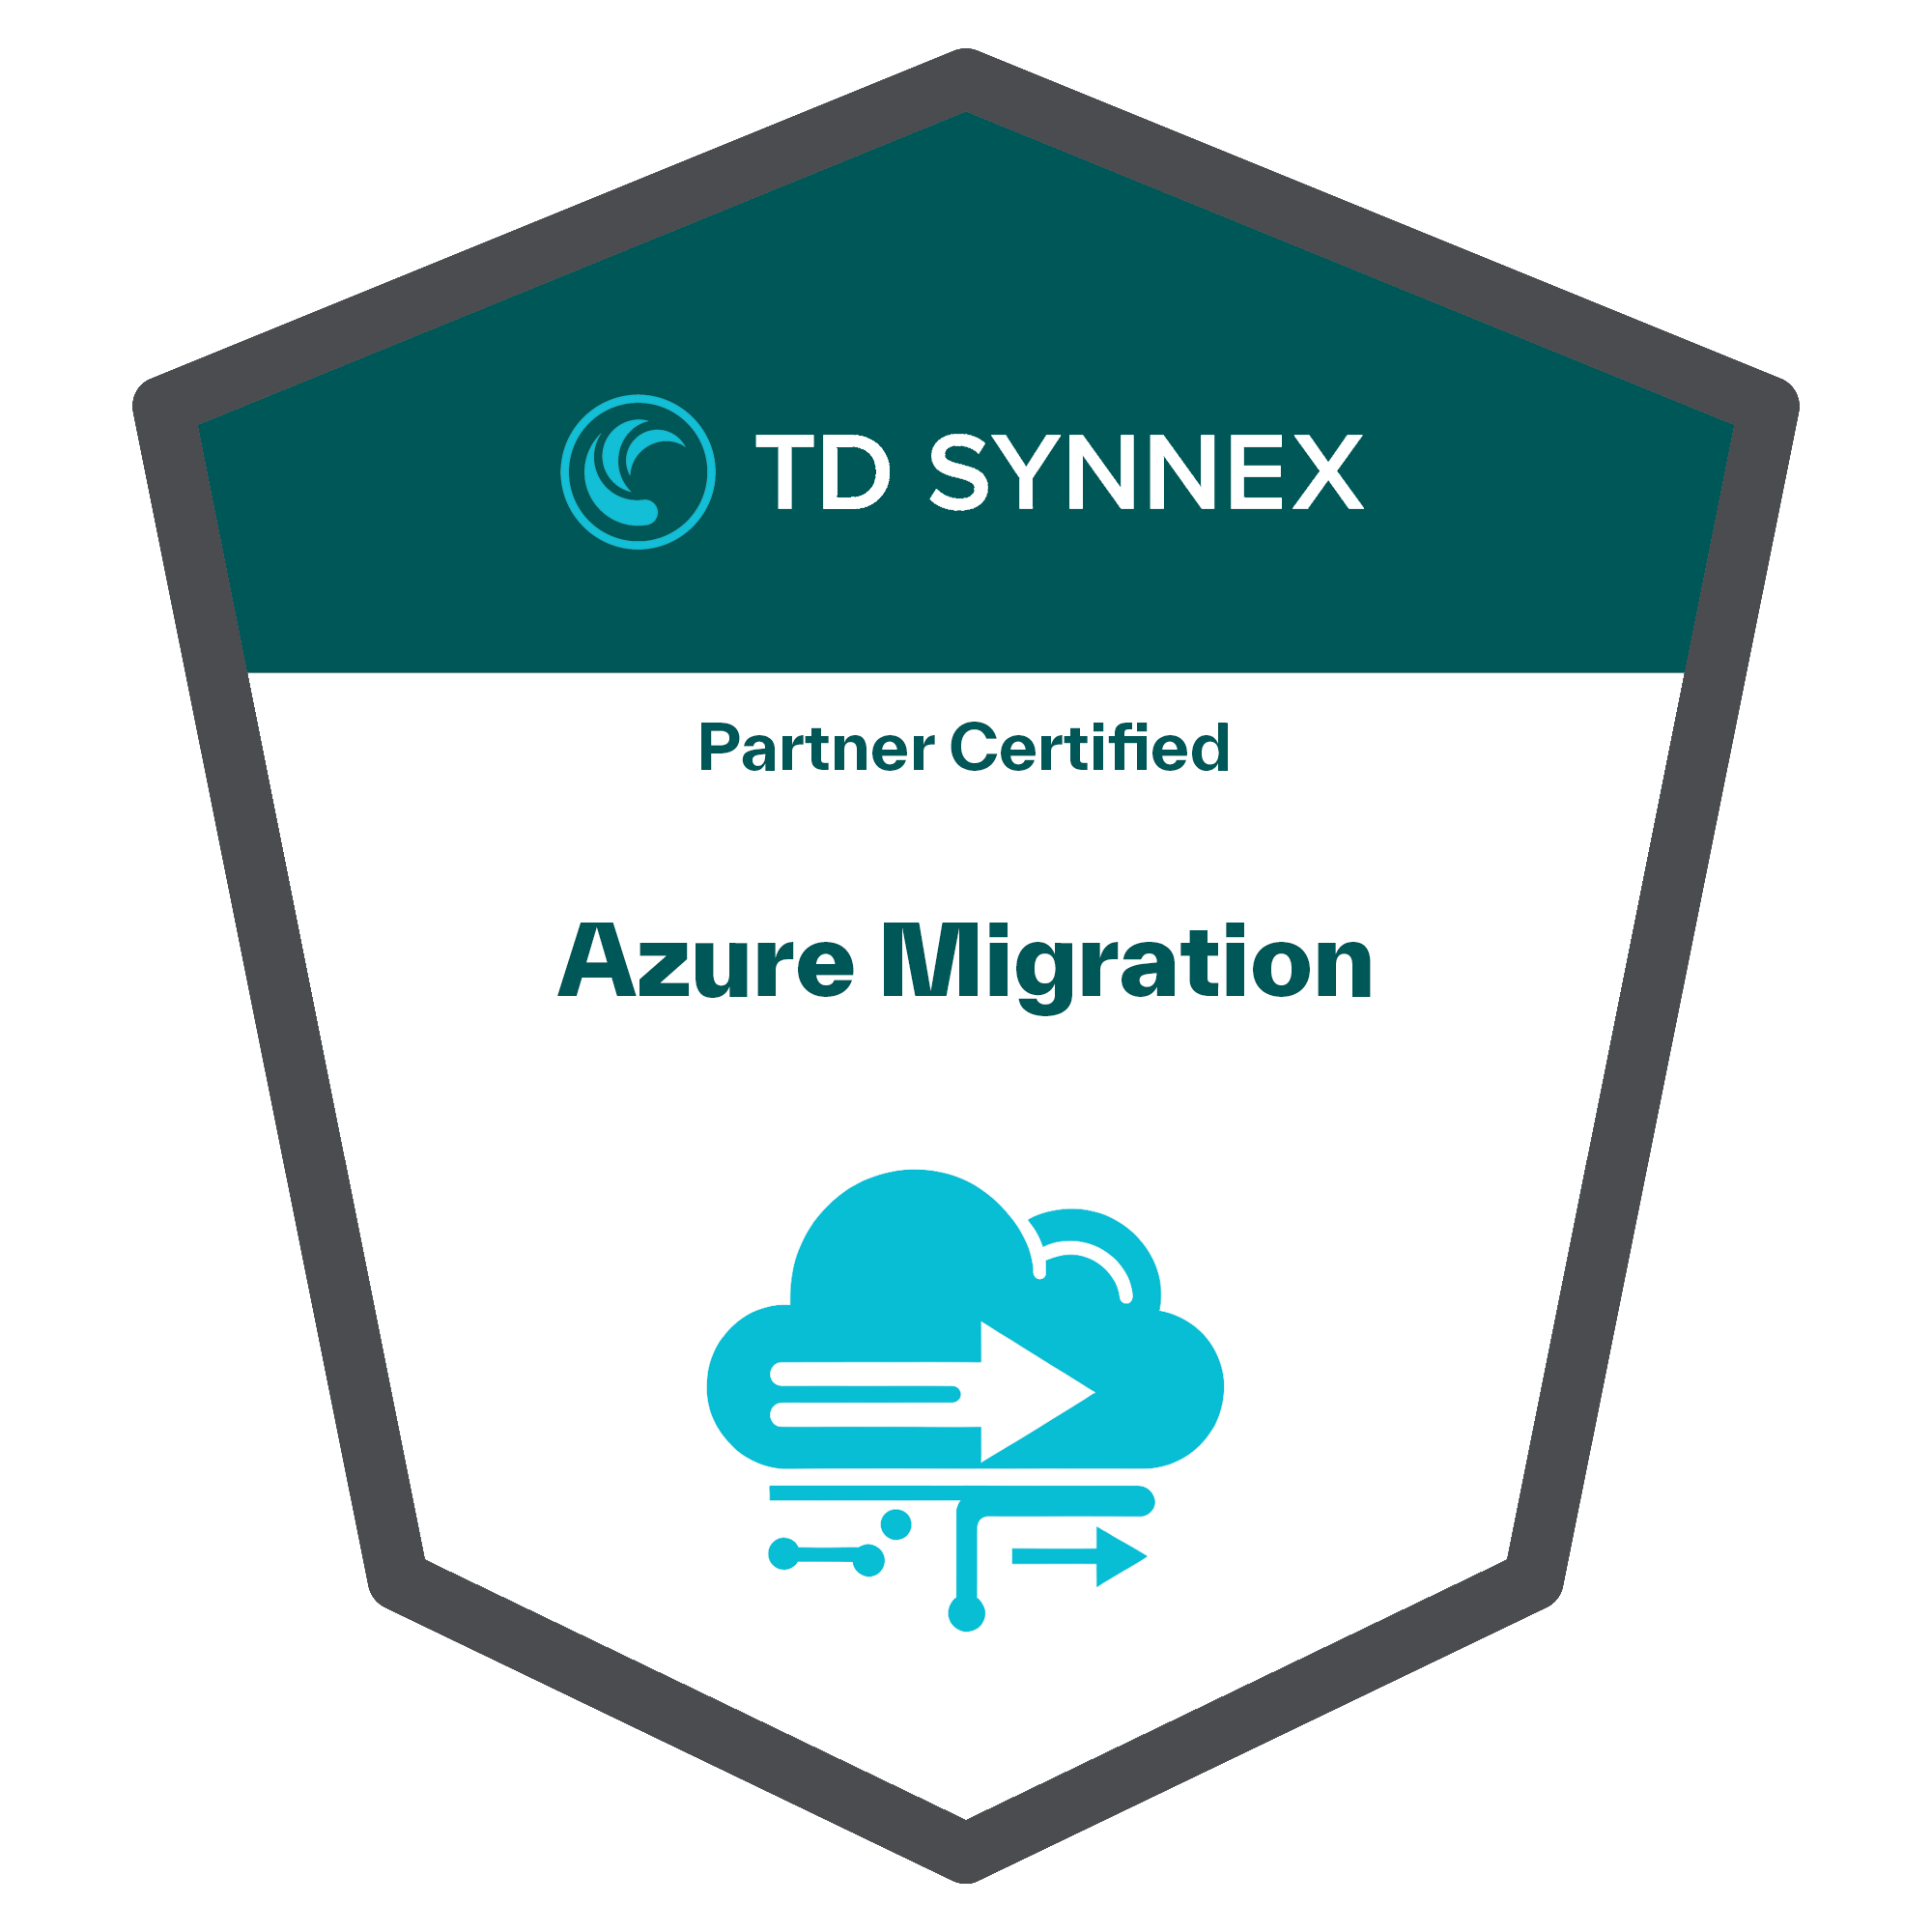 Azure Migration course on TD SYNNEX Channel Academy receives positive partner feedback